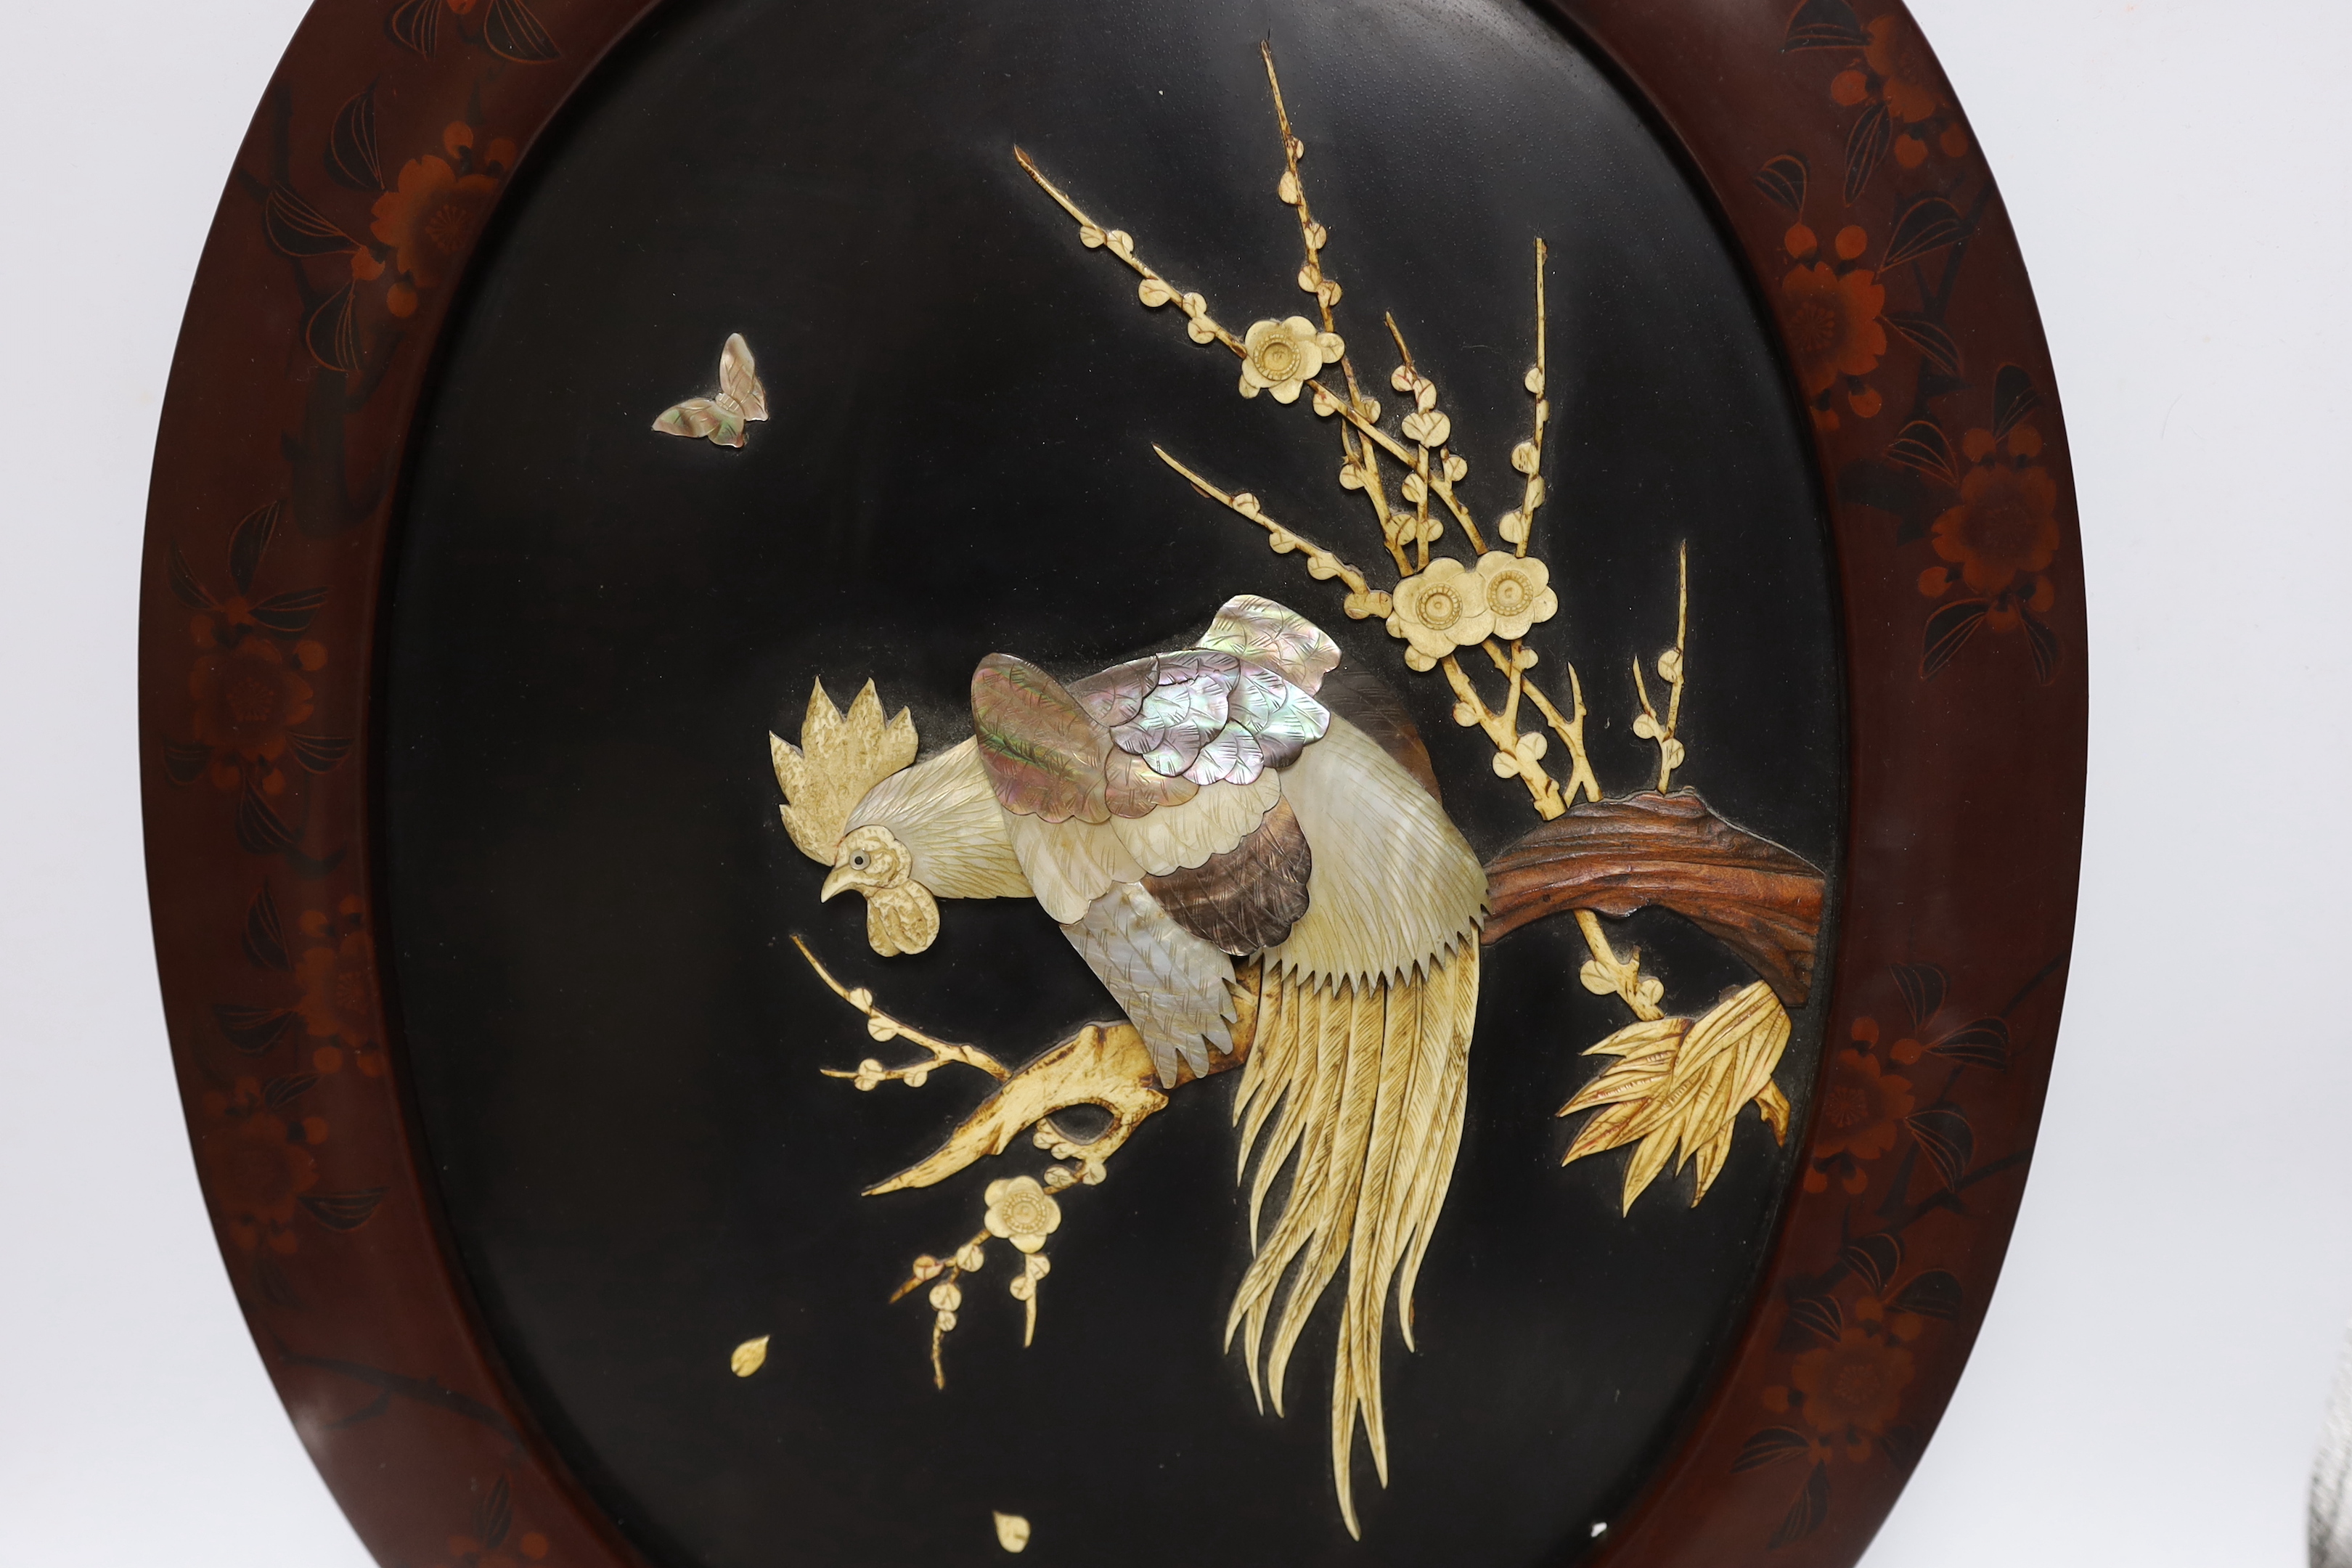 A Japanese bone and mother of pearl inlaid oval panel, cockerel amongst flowers